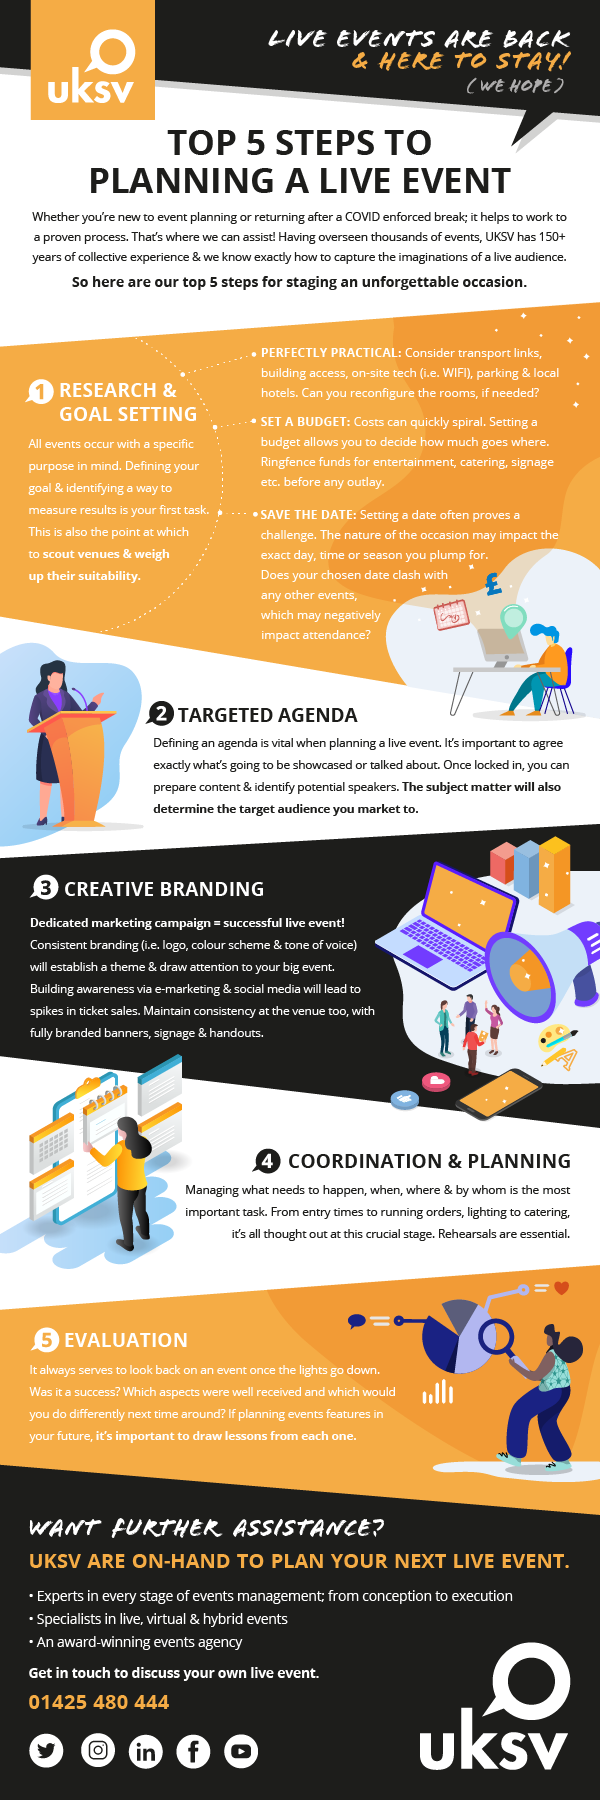 Top 5 Steps To Planning A Live Event-png